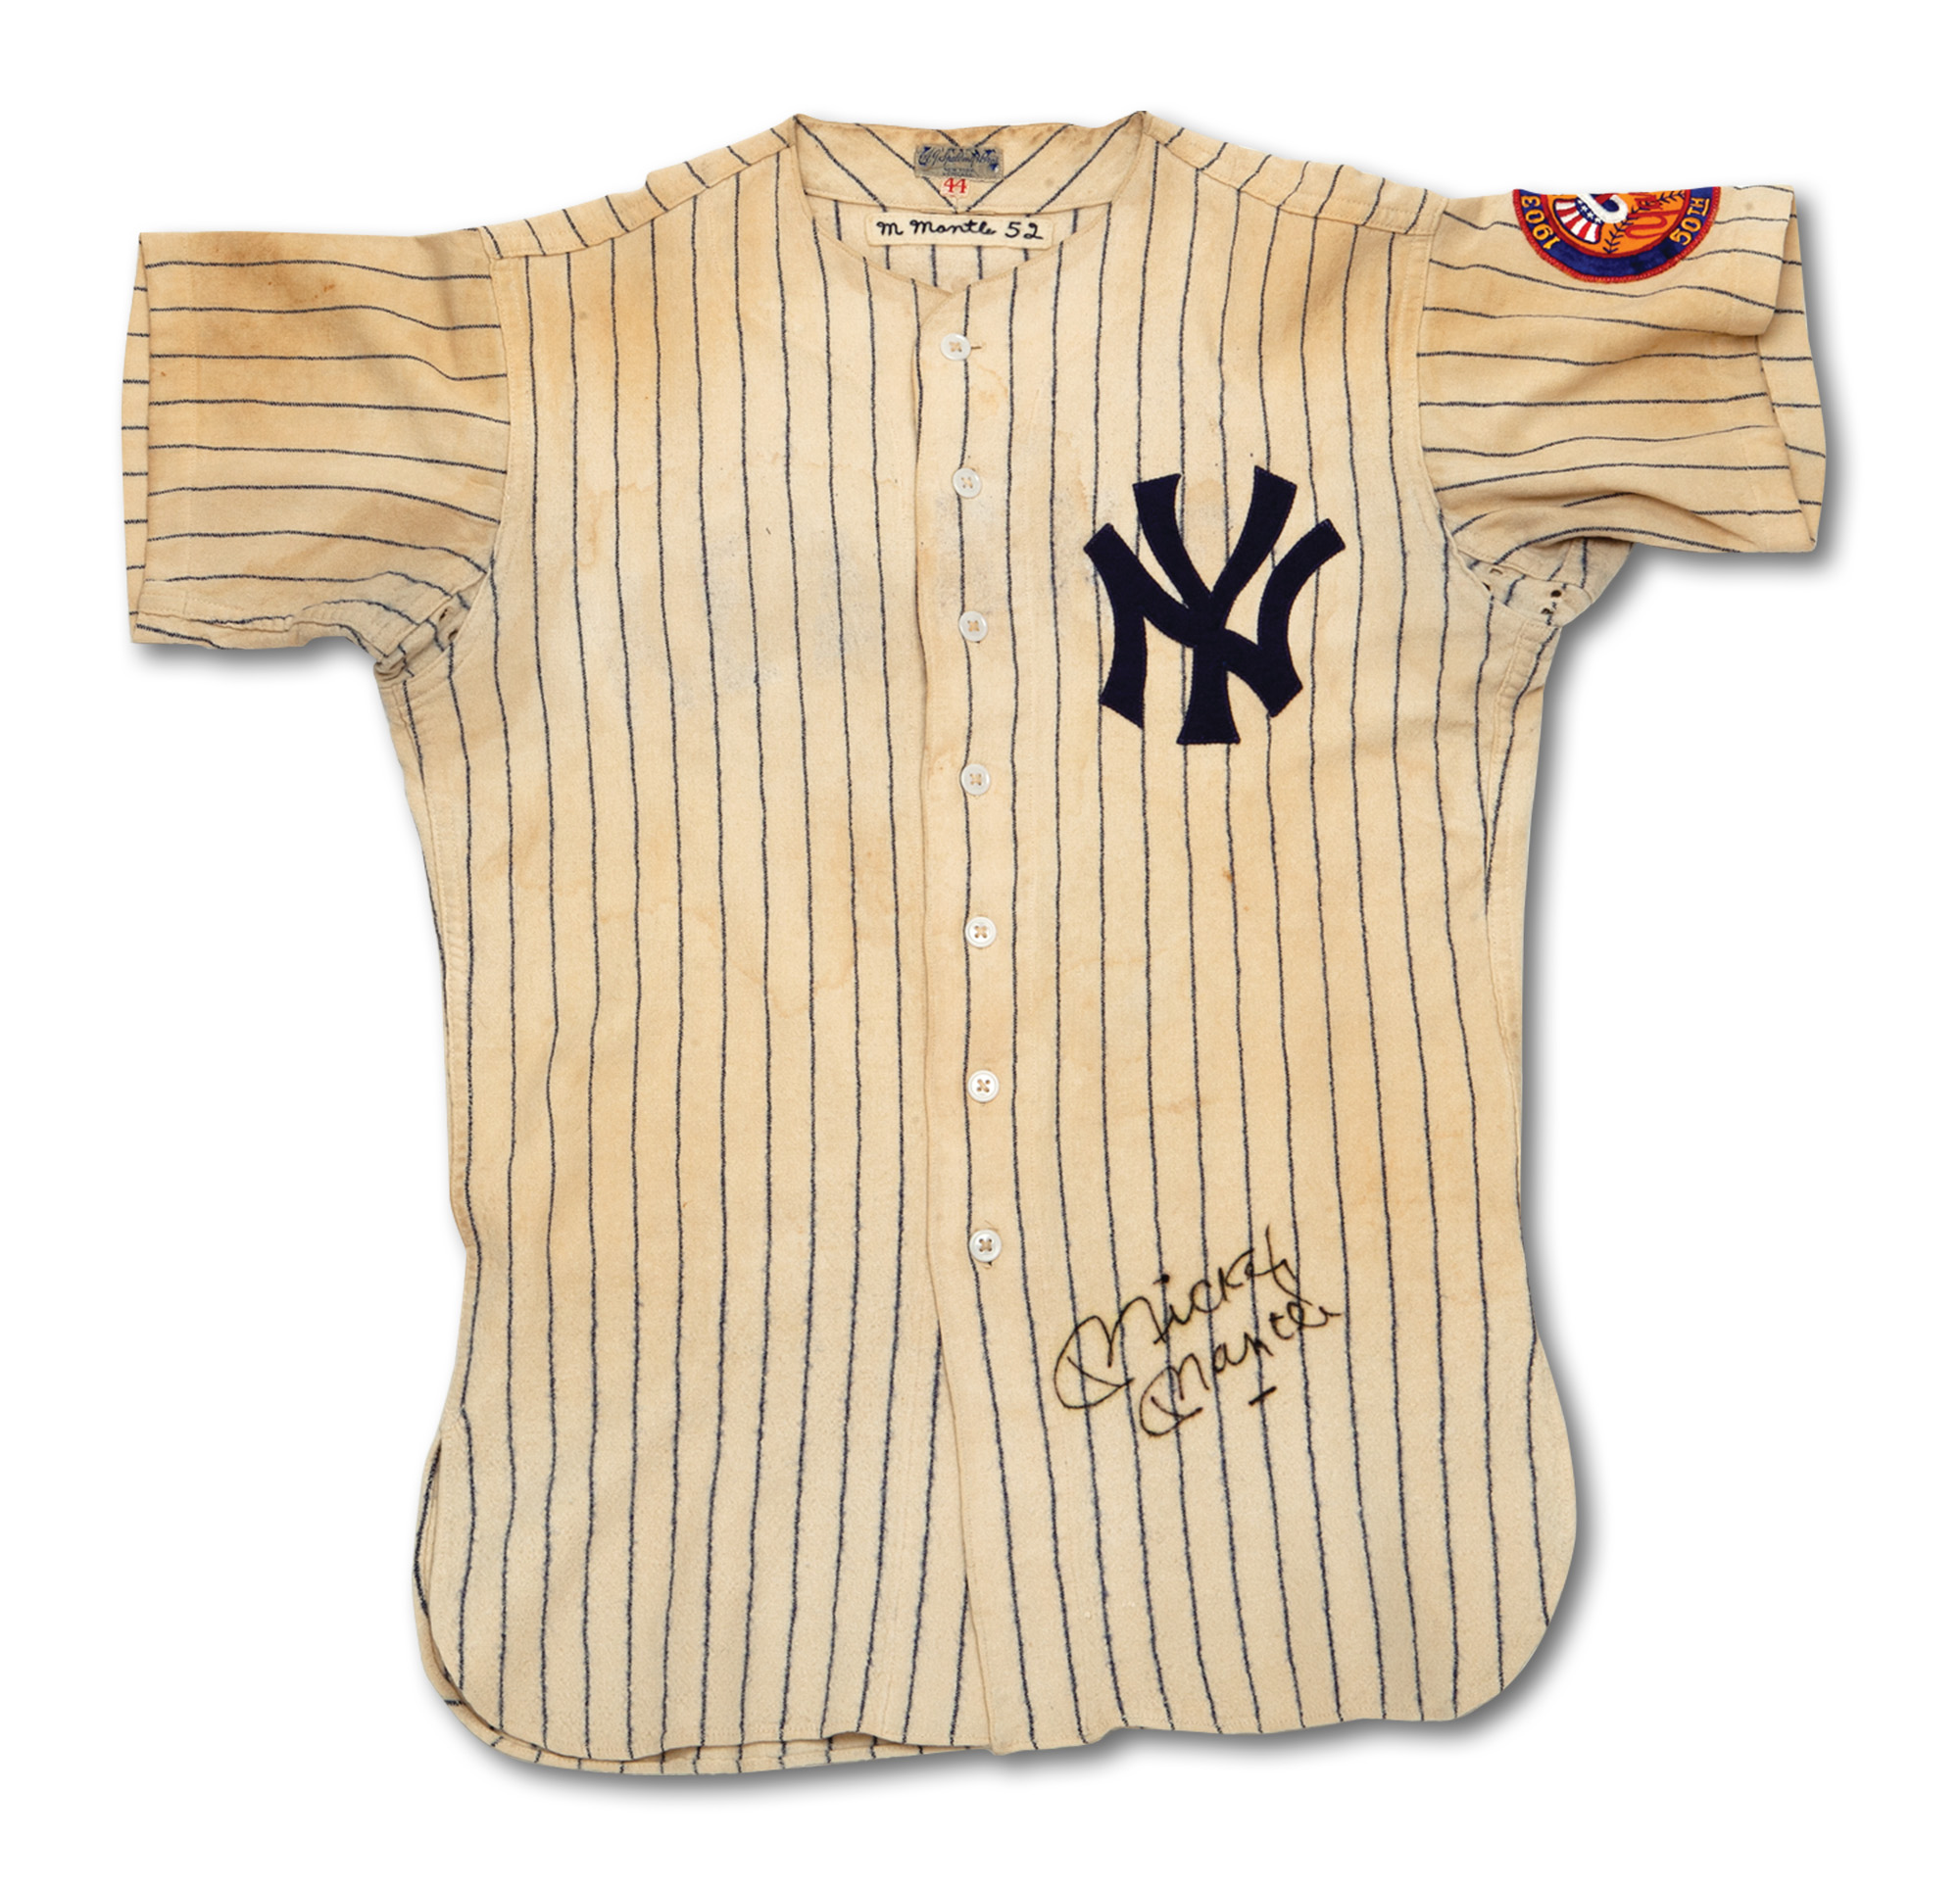 mantle game used